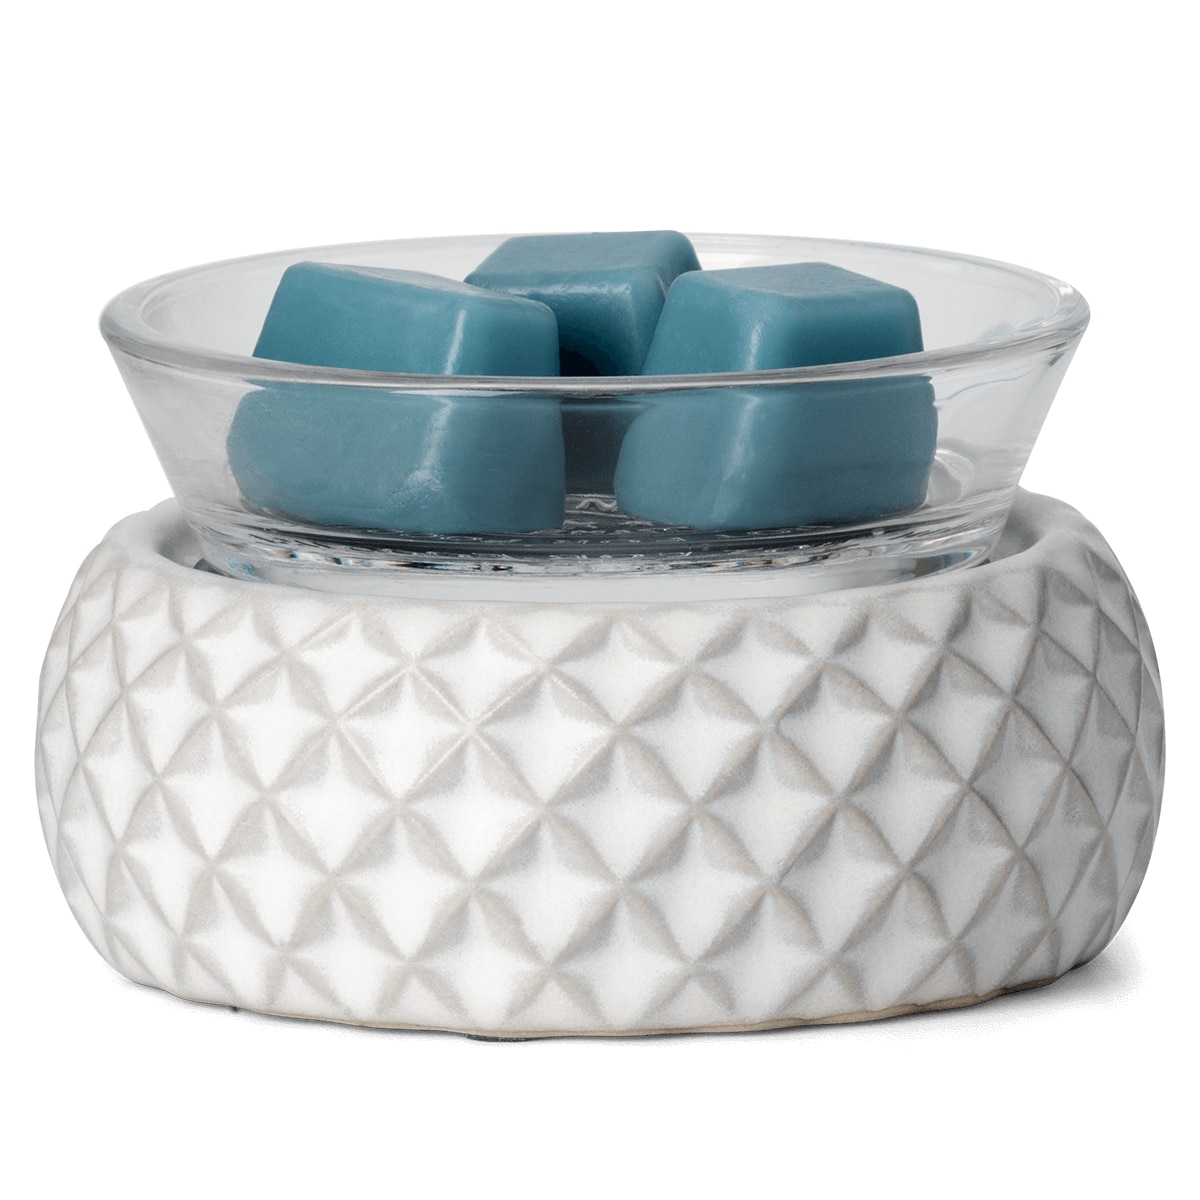 https://www.thecandleboutique.co.uk/wp-content/uploads/2023/02/Simply-Diamond-Scentsy-Warmer-With-Wax.jpg